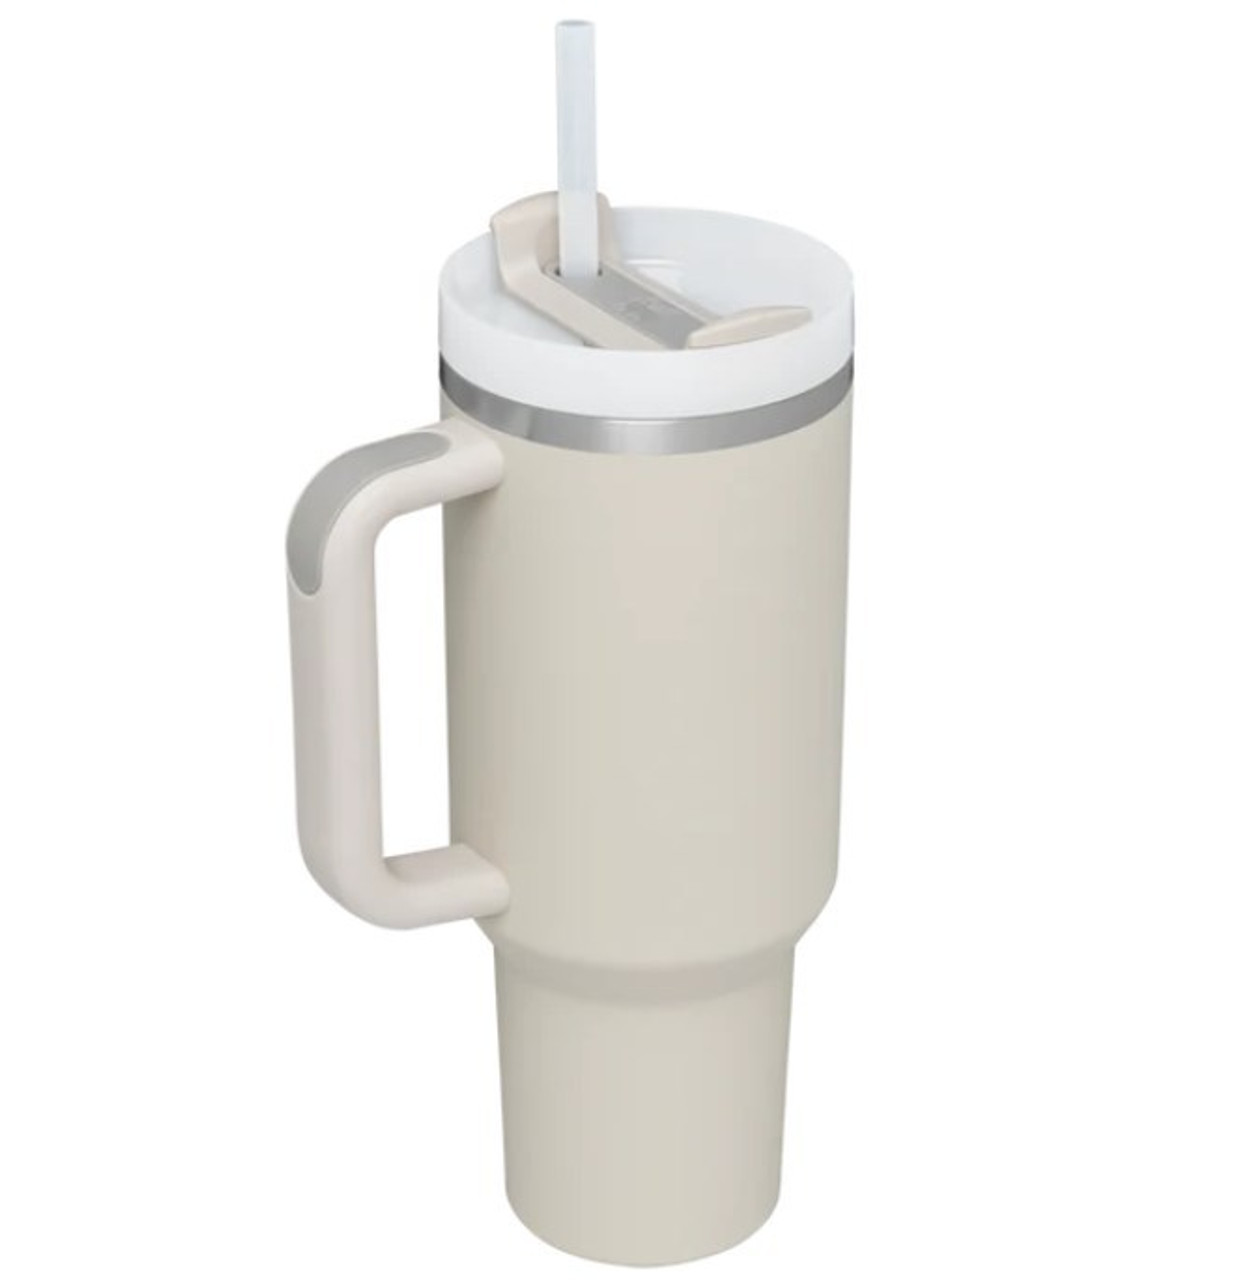 KAT MCRAE 40 OZ. DUNE TUMBLER WITH HANDLE - Pee Dee Outfitters